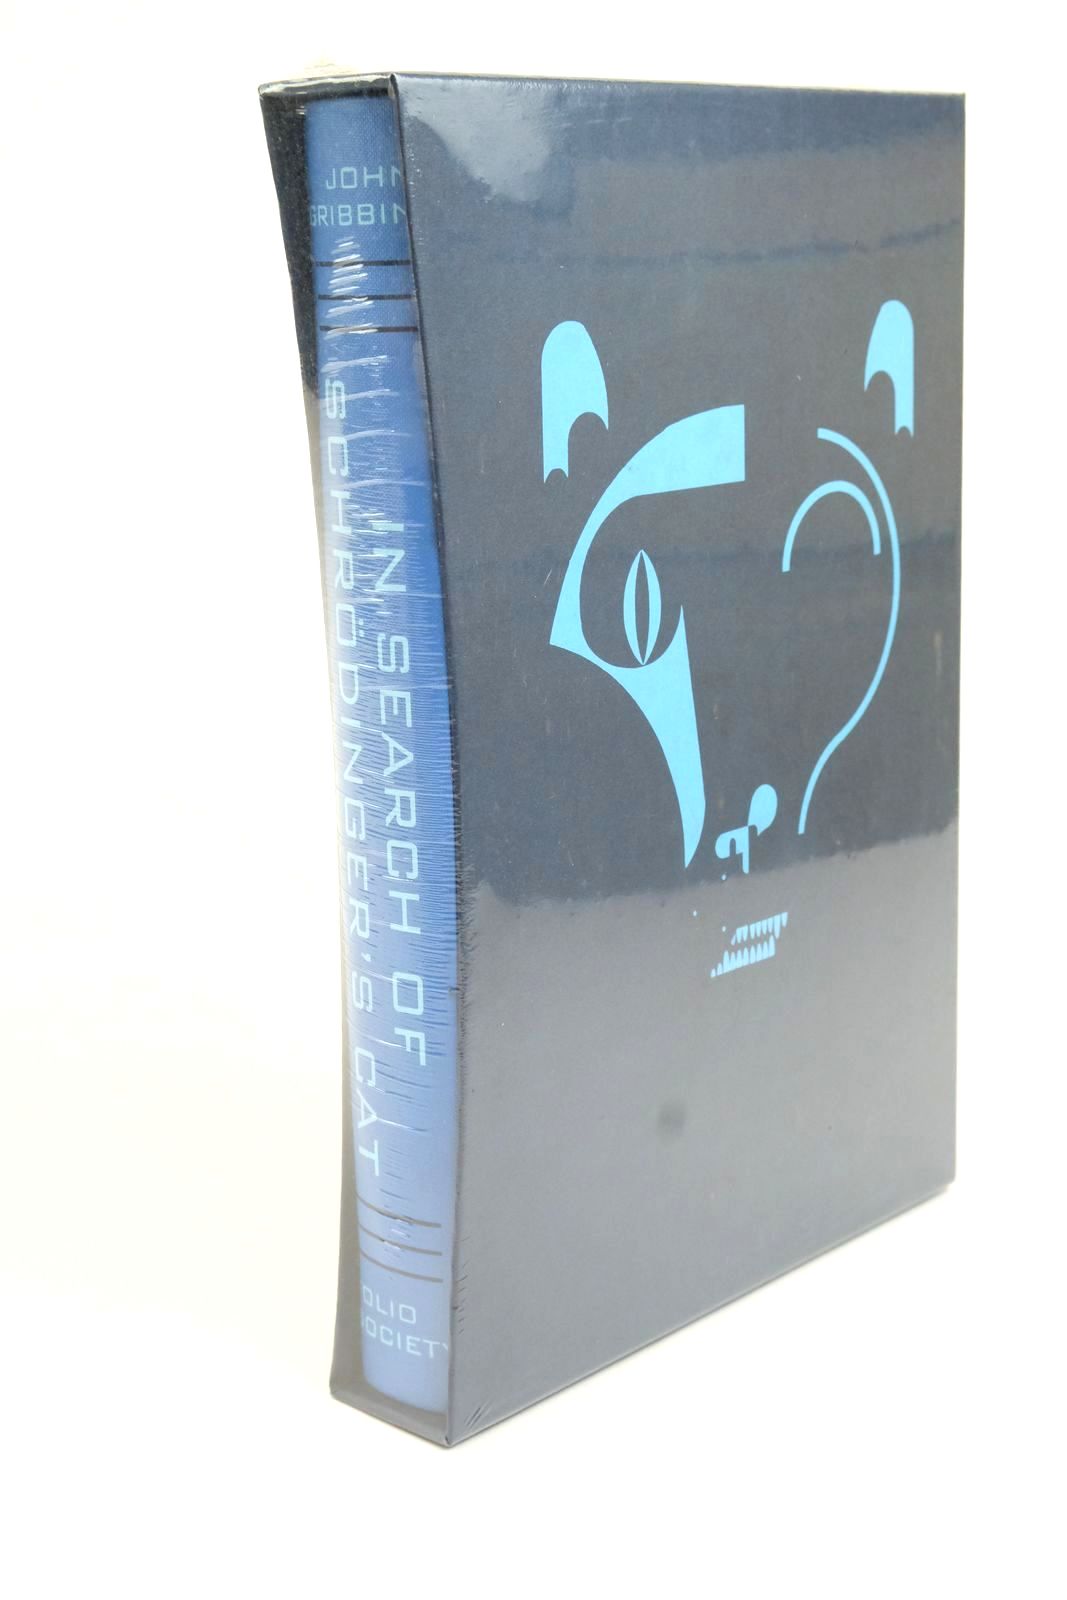 Photo of IN SEARCH OF SCHRODINGER'S CAT written by Gribbin, John illustrated by Biesinger, Raymond published by Folio Society (STOCK CODE: 1321989)  for sale by Stella & Rose's Books